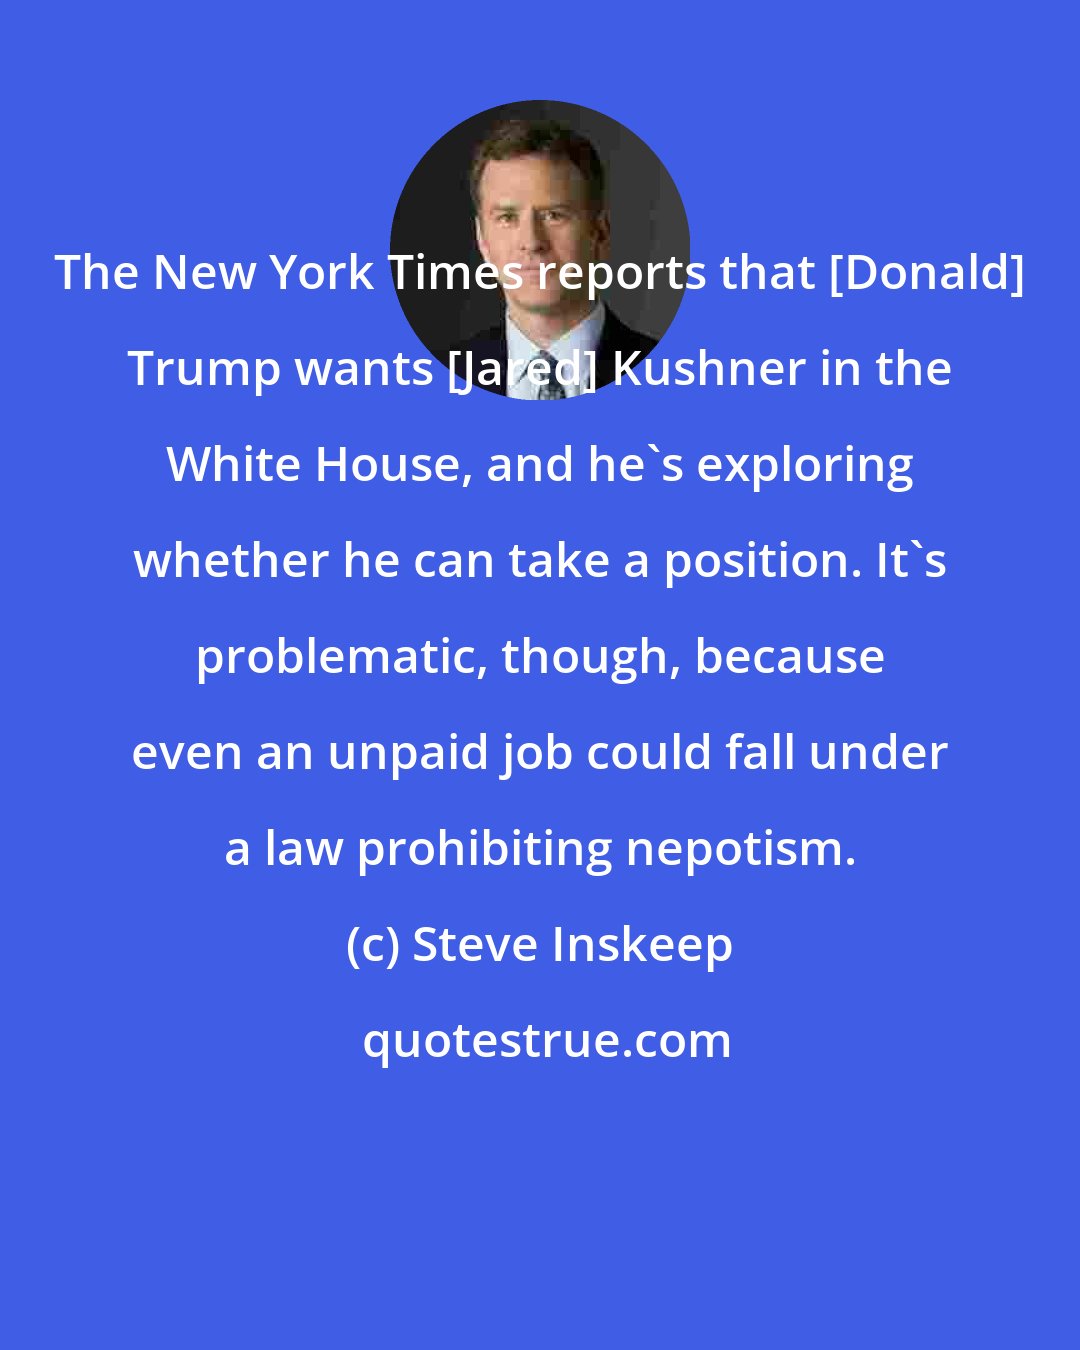 Steve Inskeep: The New York Times reports that [Donald] Trump wants [Jared] Kushner in the White House, and he's exploring whether he can take a position. It's problematic, though, because even an unpaid job could fall under a law prohibiting nepotism.